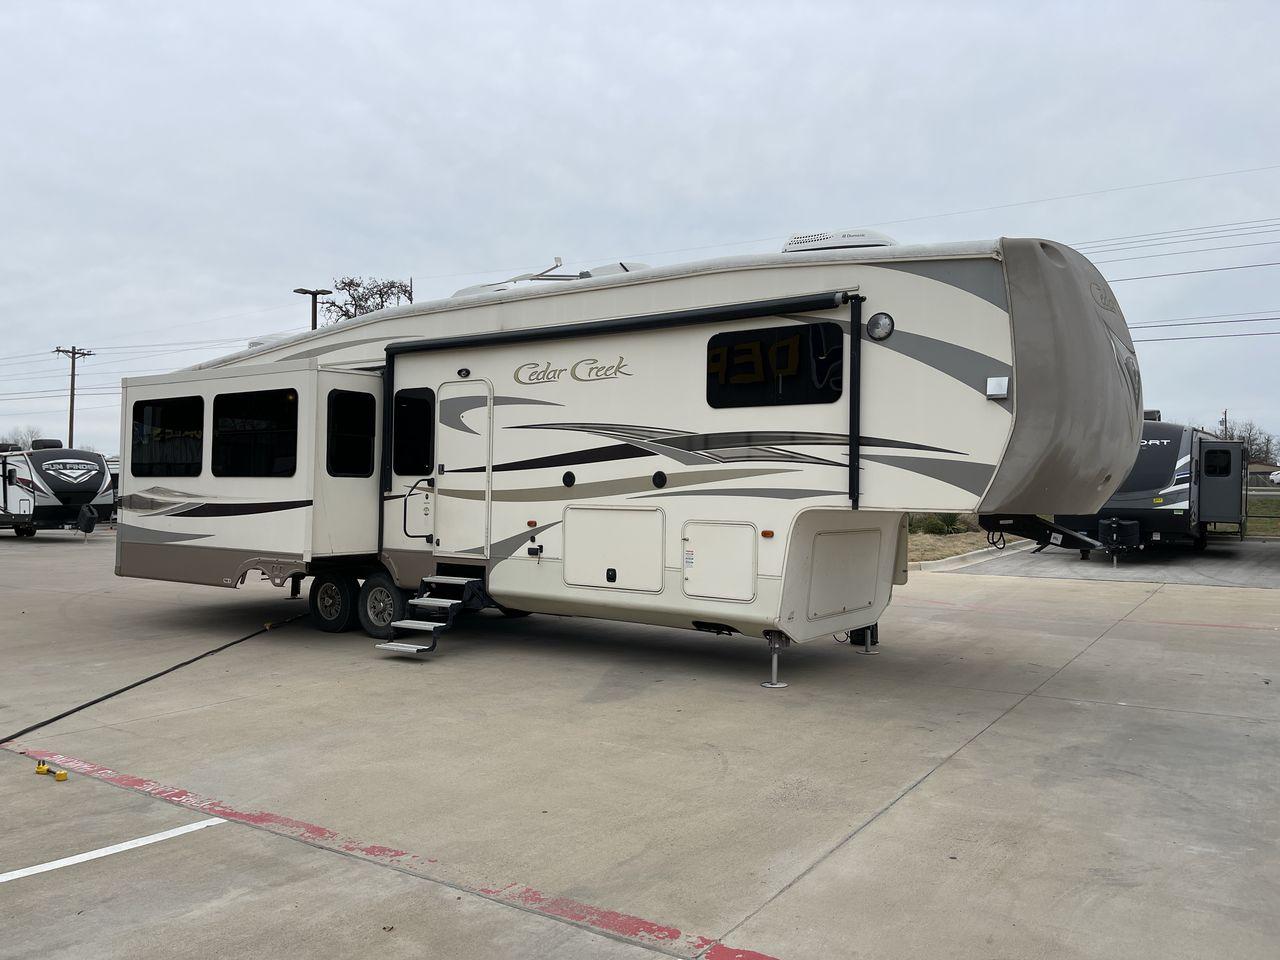 2014 TAN FOREST RIVER CEDAR CREEK 36CKTS (4X4FCRM26ES) , Length: 39.92 ft. | Dry Weight: 12,076 lbs. | Gross Weight: 16,389 lbs. | Slides: 3 transmission, located at 4319 N Main Street, Cleburne, TX, 76033, (817) 221-0660, 32.435829, -97.384178 - This 2014 Forest River Cedar Creek 36CKTS Fifth Wheel measures just shy of 40 feet long and 8 feet wide. This model has a GVWR of 16,389 and a hitch weight of 2,389 lbs. This unit is equipped with heating rated at 40,000 BTUs, and cooling rated at 15,000 BTUs, meaning it will always be exactly the t - Photo #24